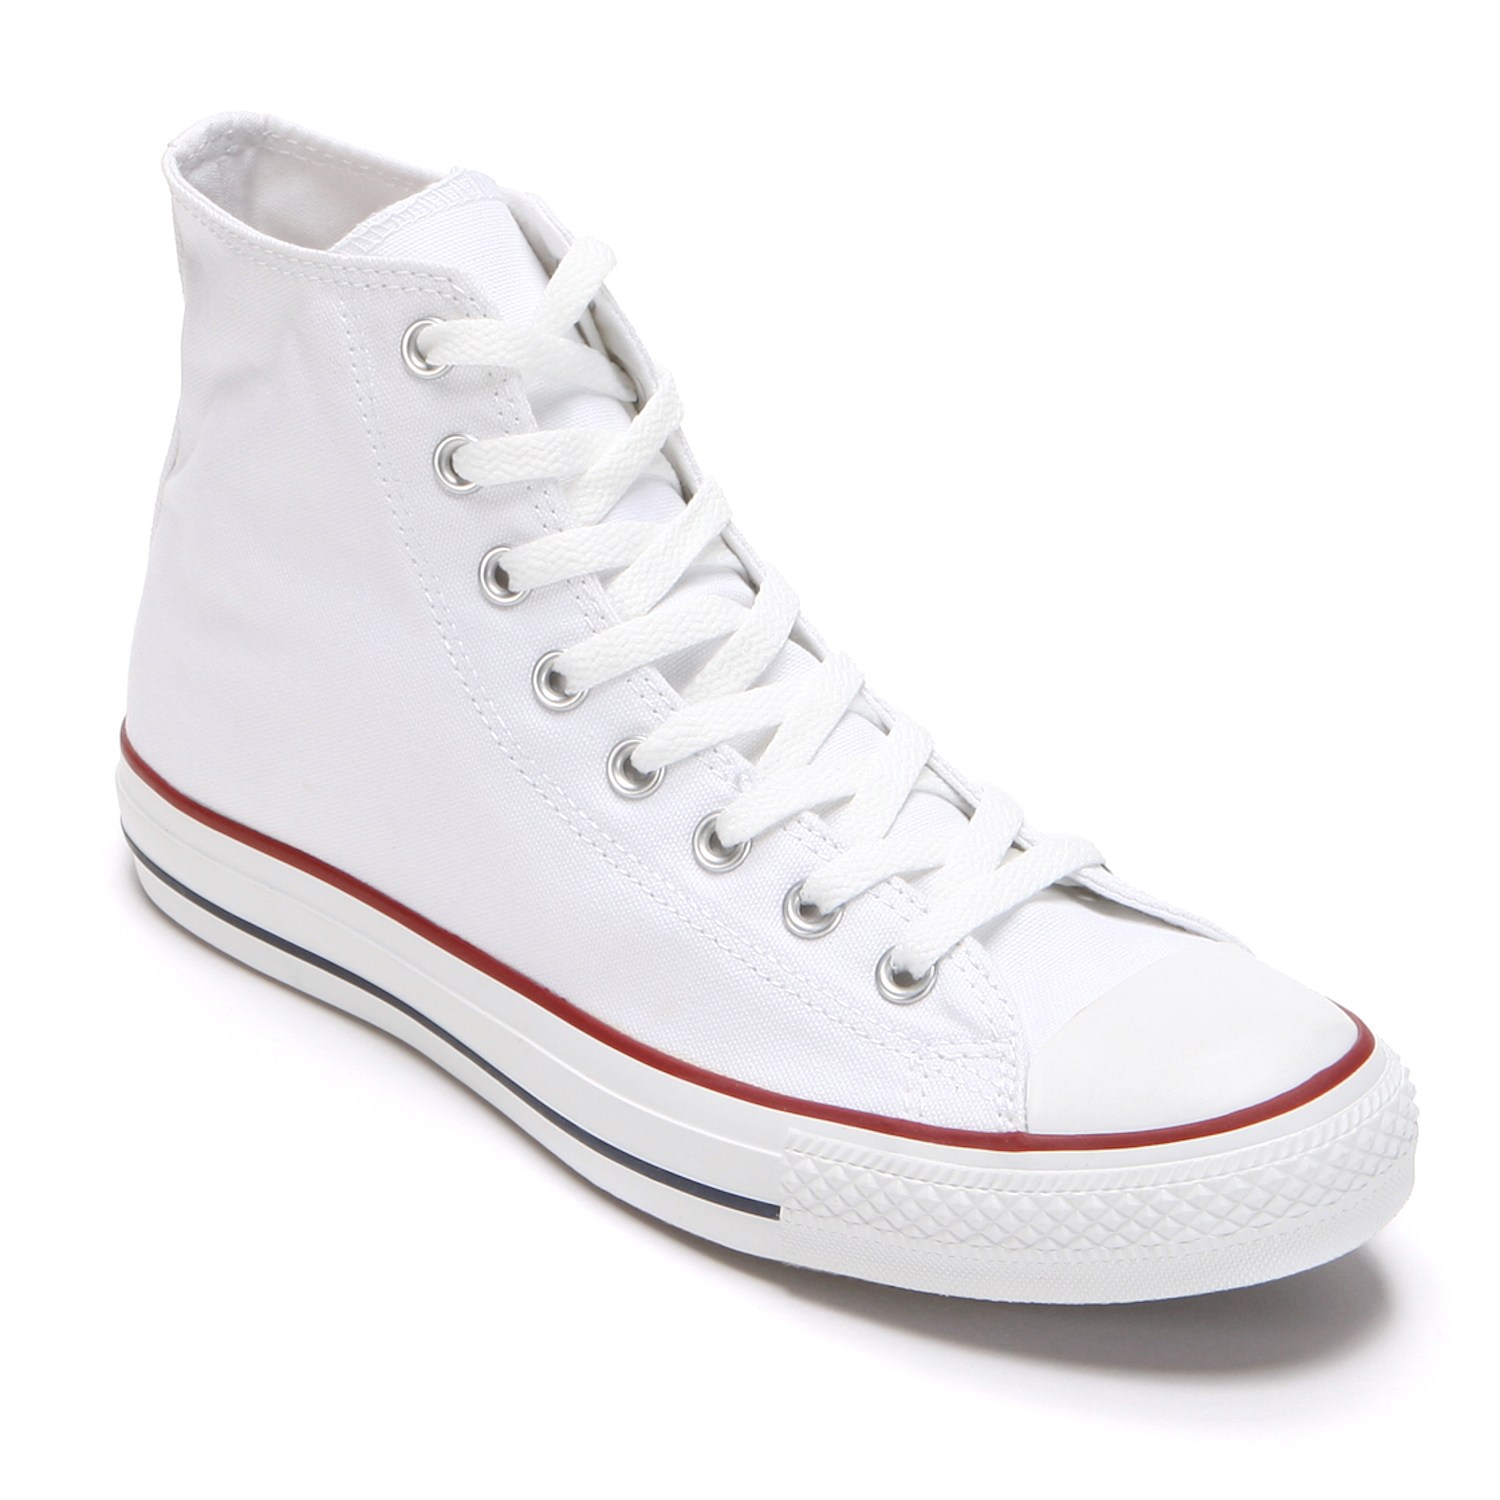 White converse adult converse all star chuck taylor high-top sneakers DNUMDXN